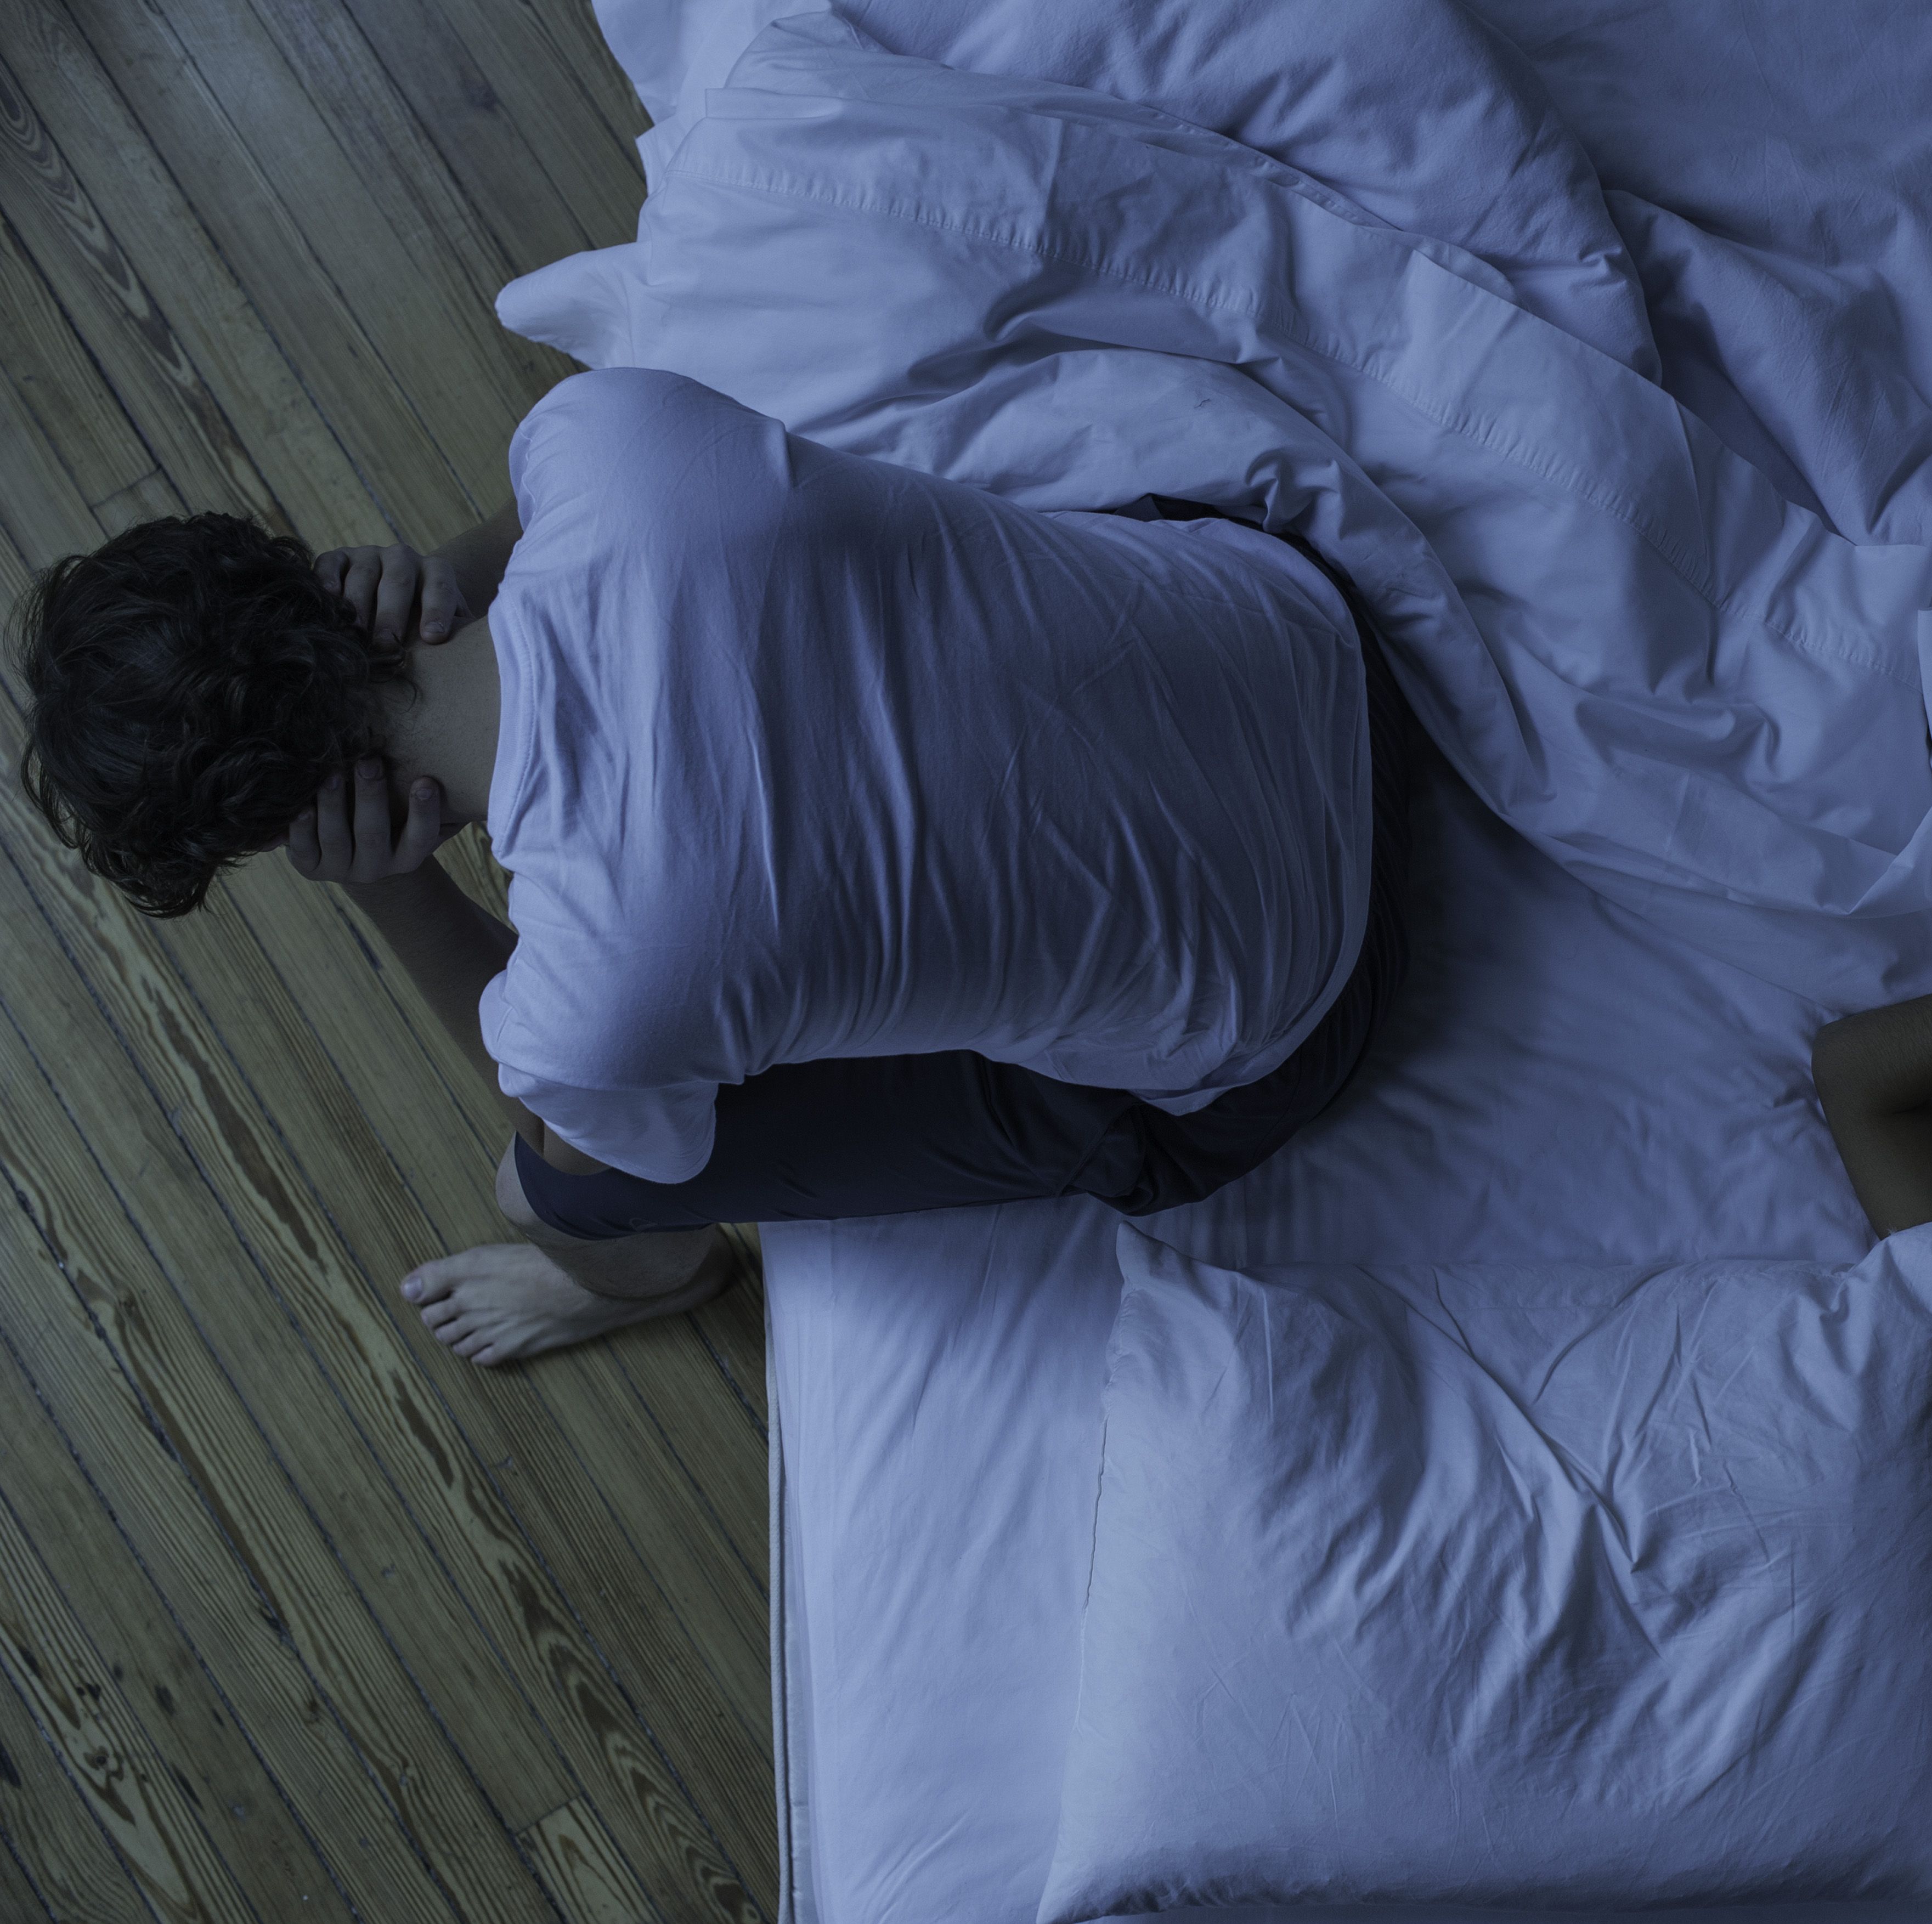 Sleep Affects Your Testosterone Levels Way More Than You Think